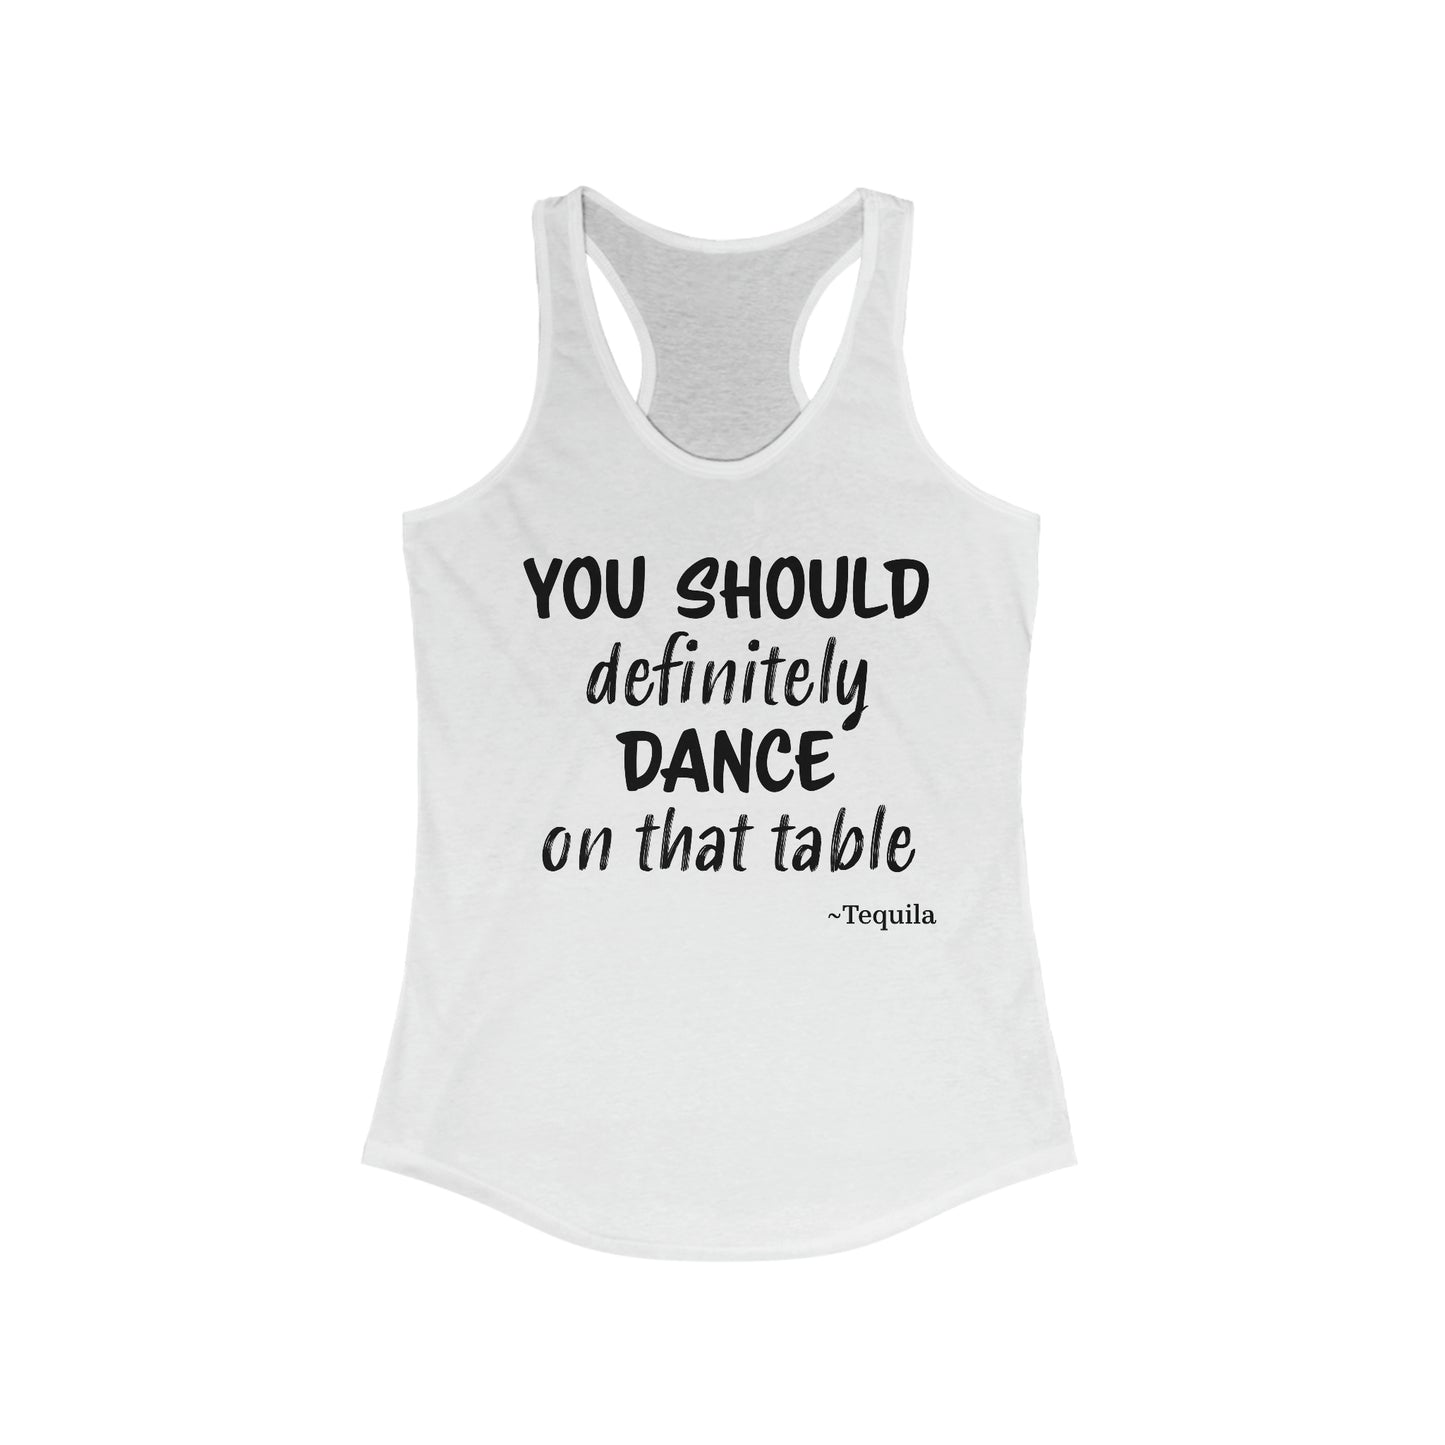 Tequila Tank Top For Dancing On Tables Tank Top For Party Time Tank Top For Girls Trip Shirt For Drinking